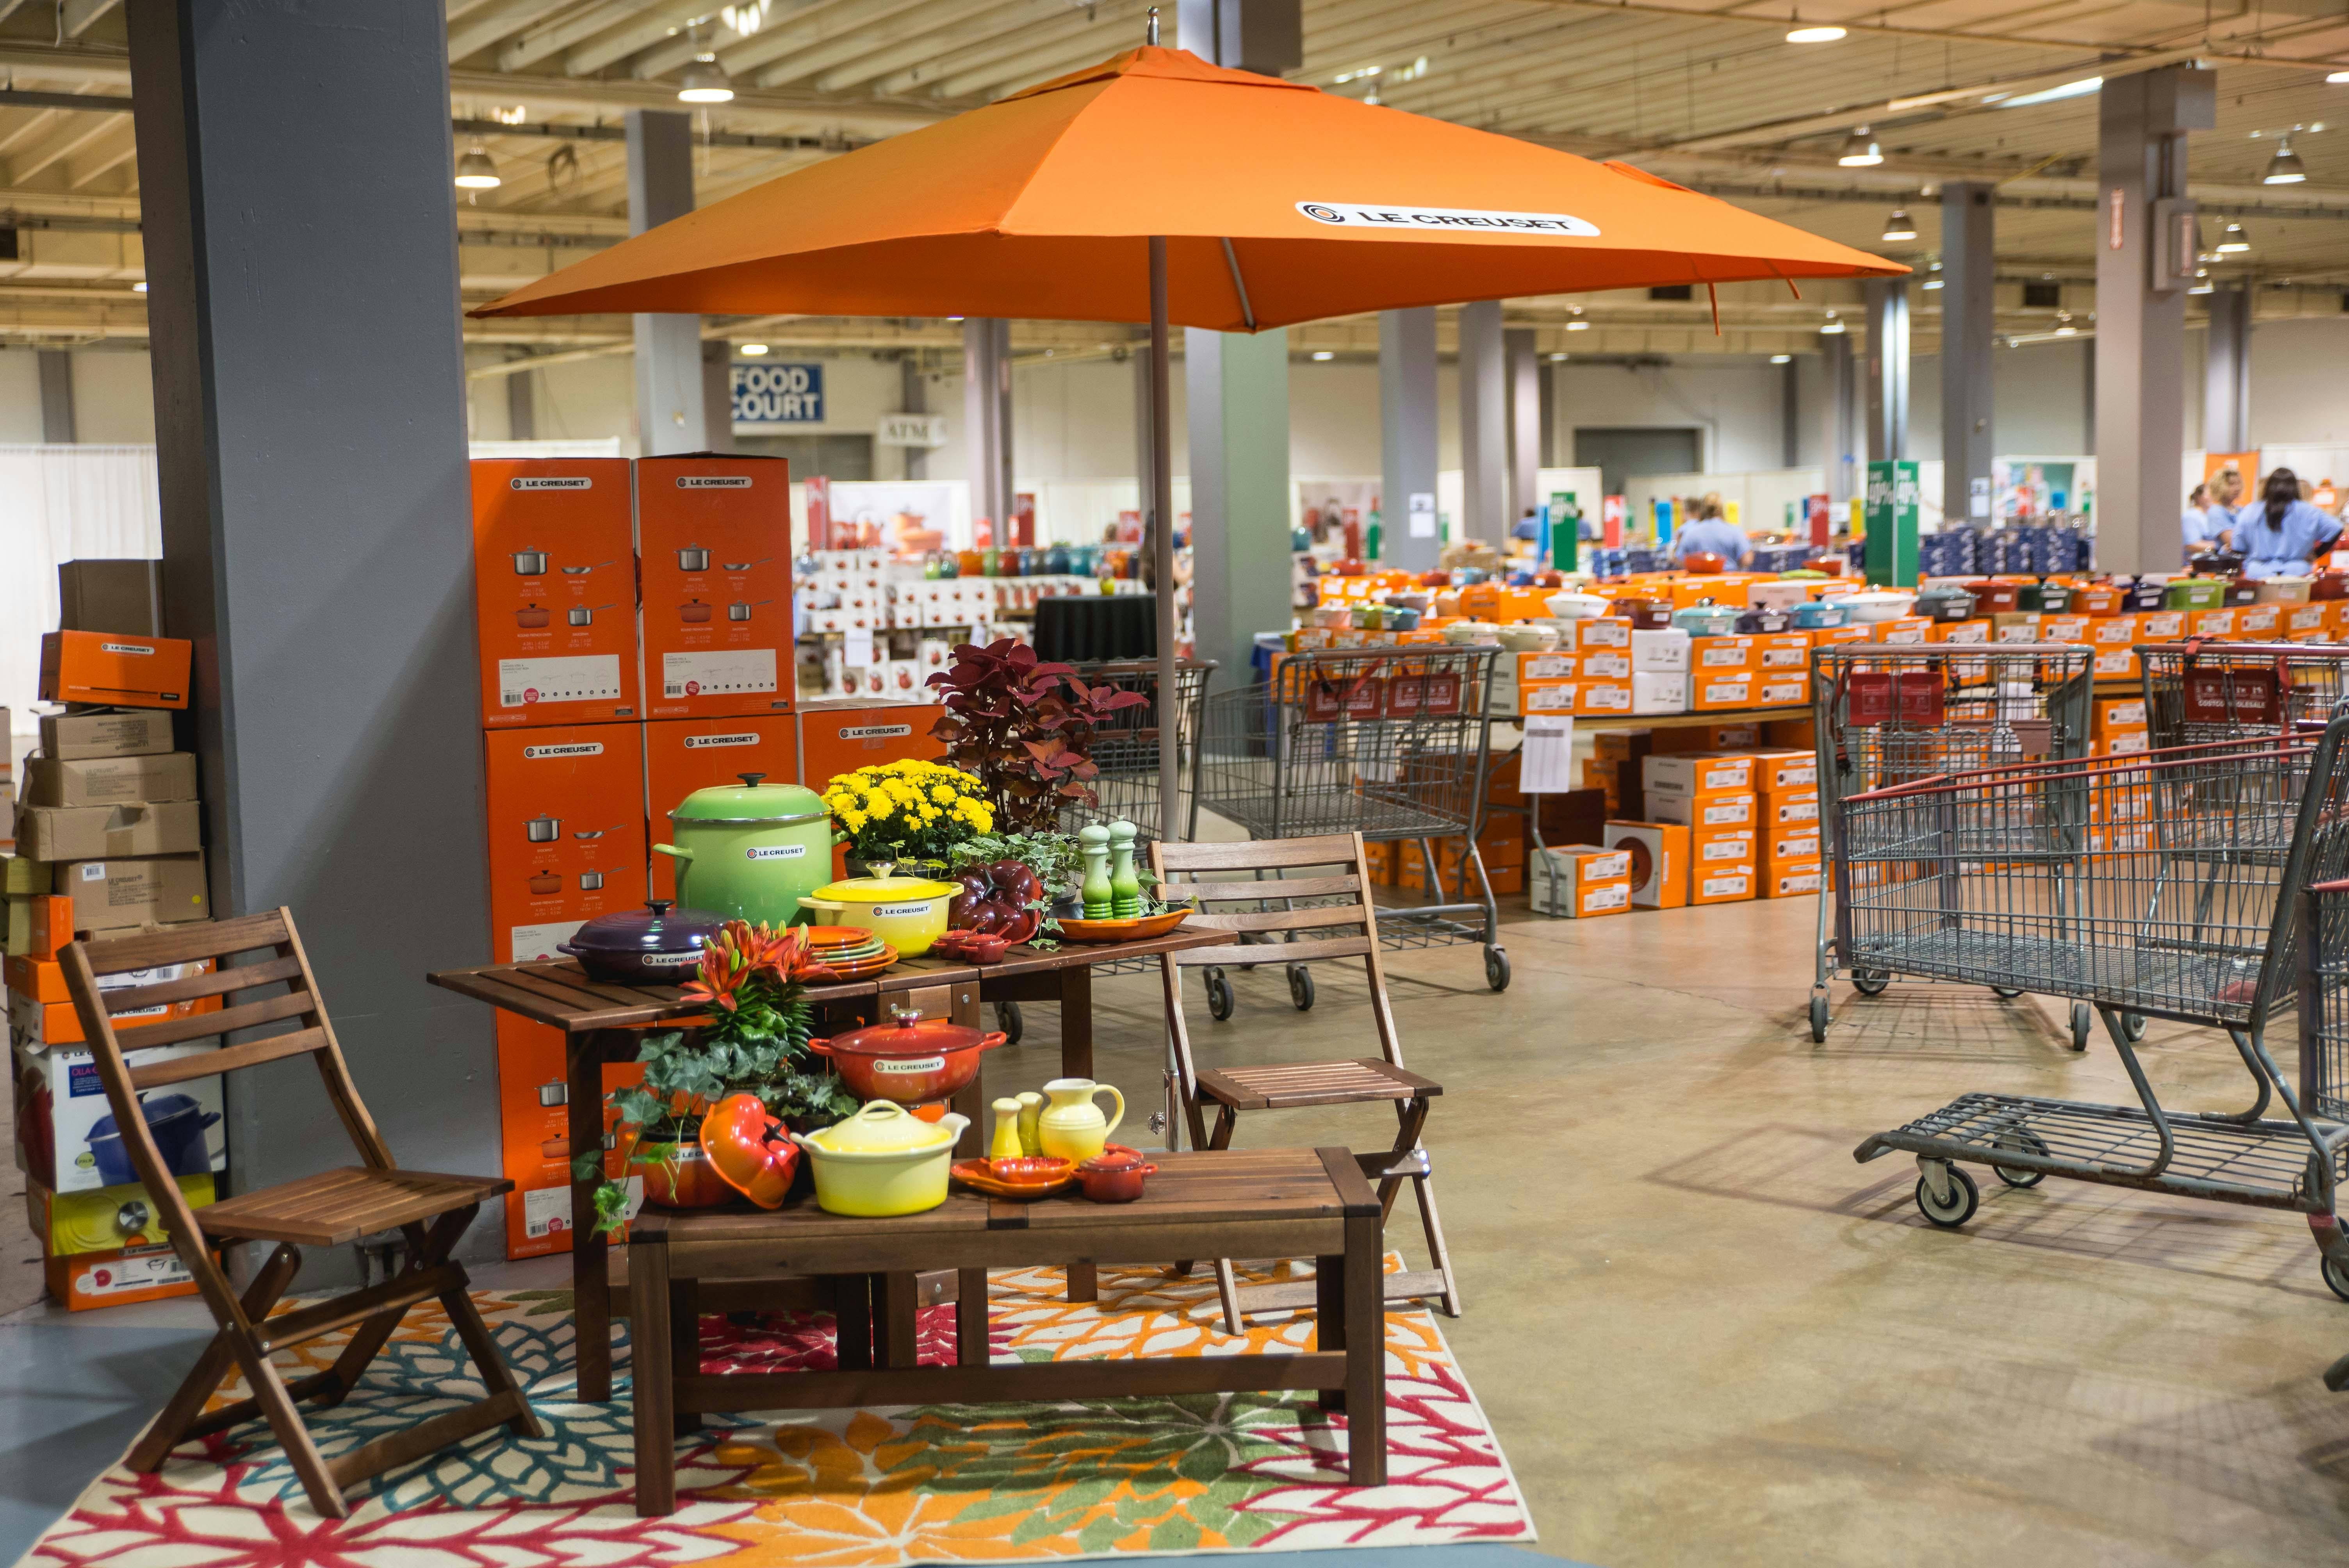 Le Creuset's famous factory sale is coming to Minneapolis and it's a big  deal